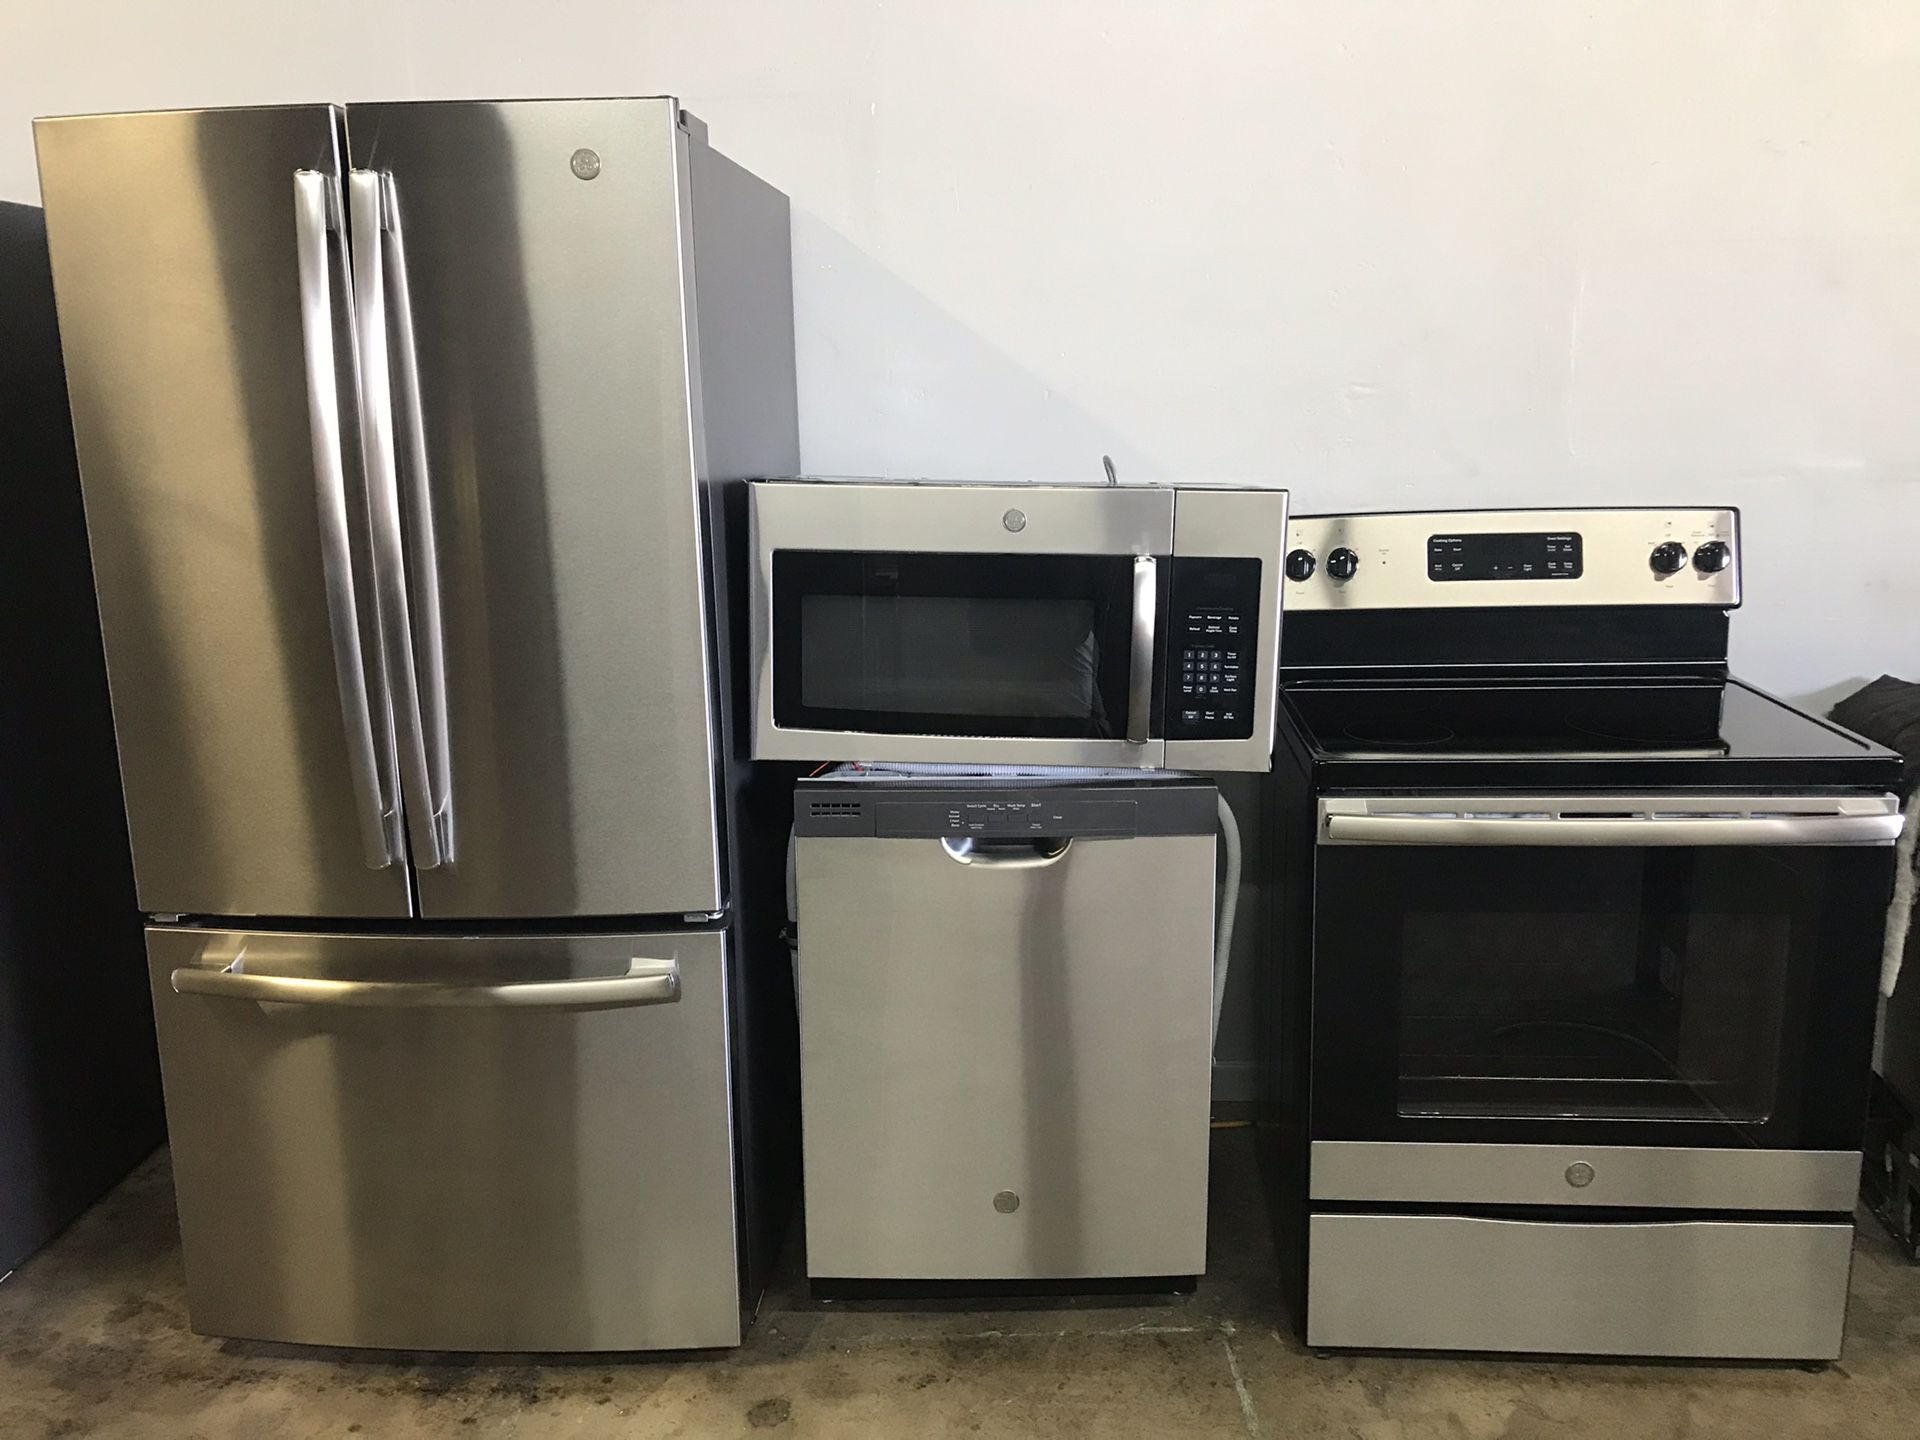 VERY NICE GE STAINLESS STEEL KITCHEN APPLIANCES SET